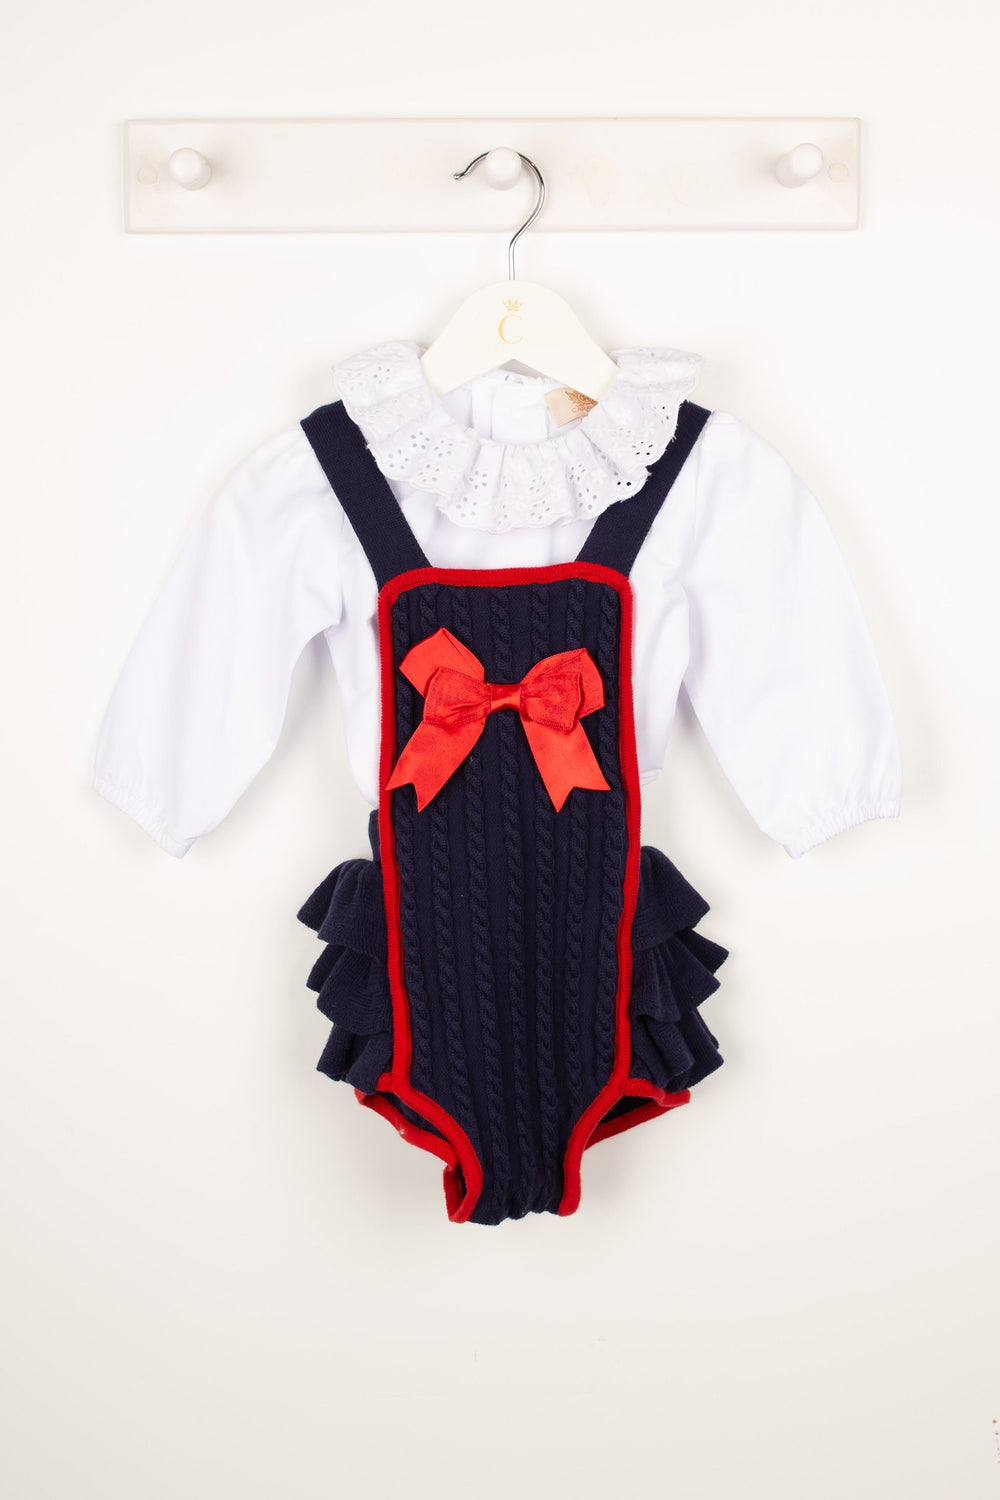 Caramelo Kids "Kaia" Navy & Red Cable Knit Romper Set | Millie and John